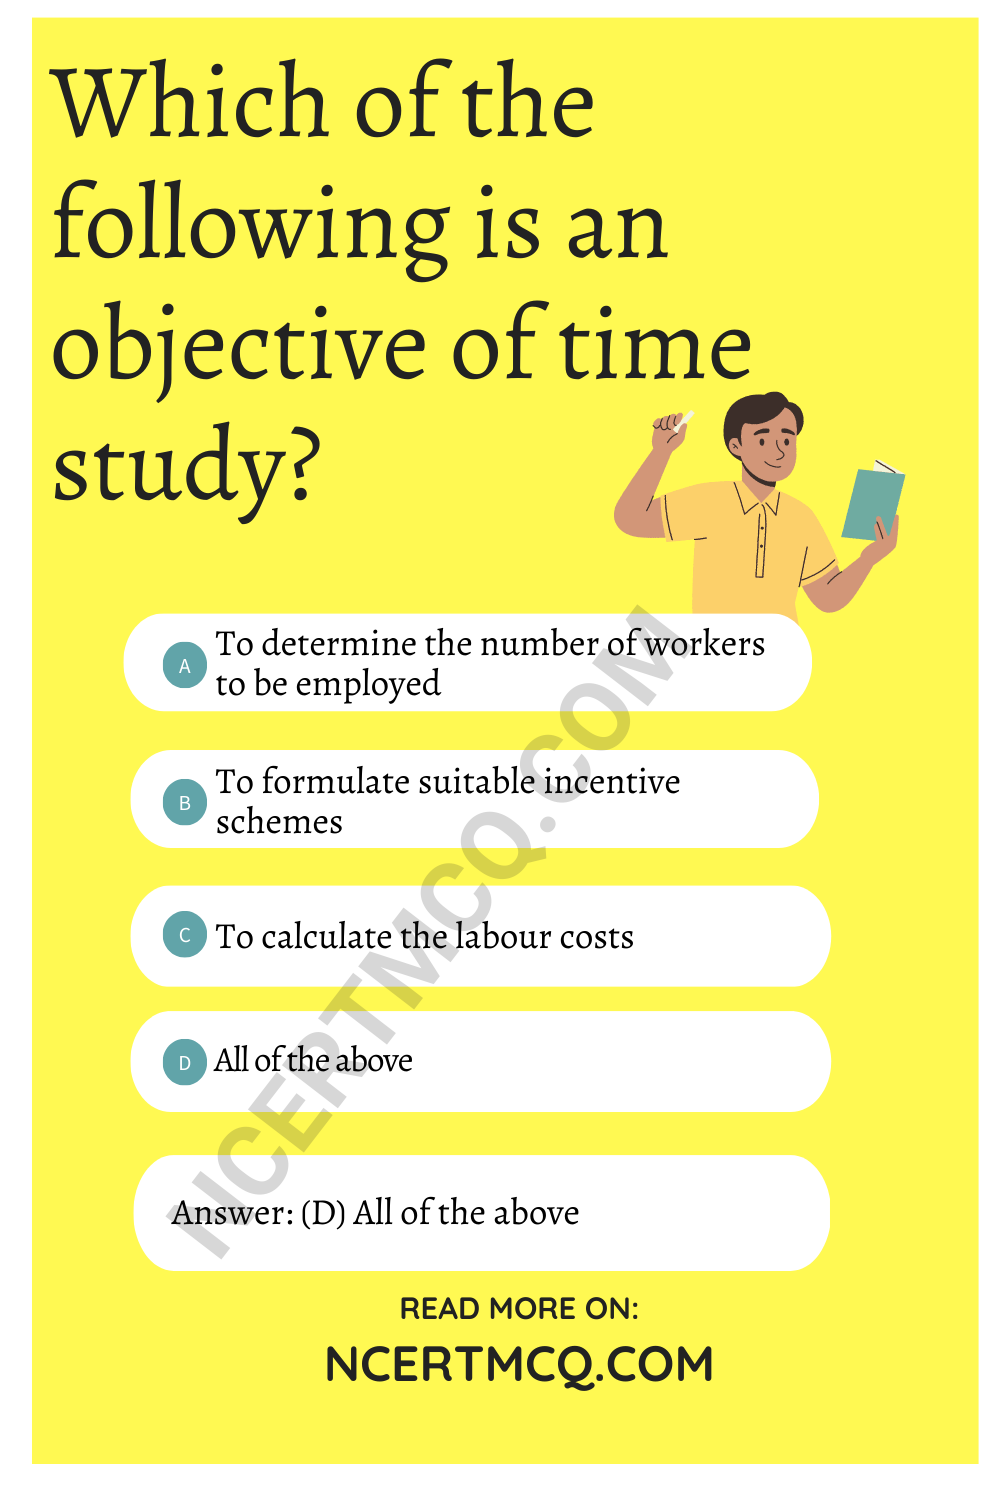 Which of the following is an objective of time study?